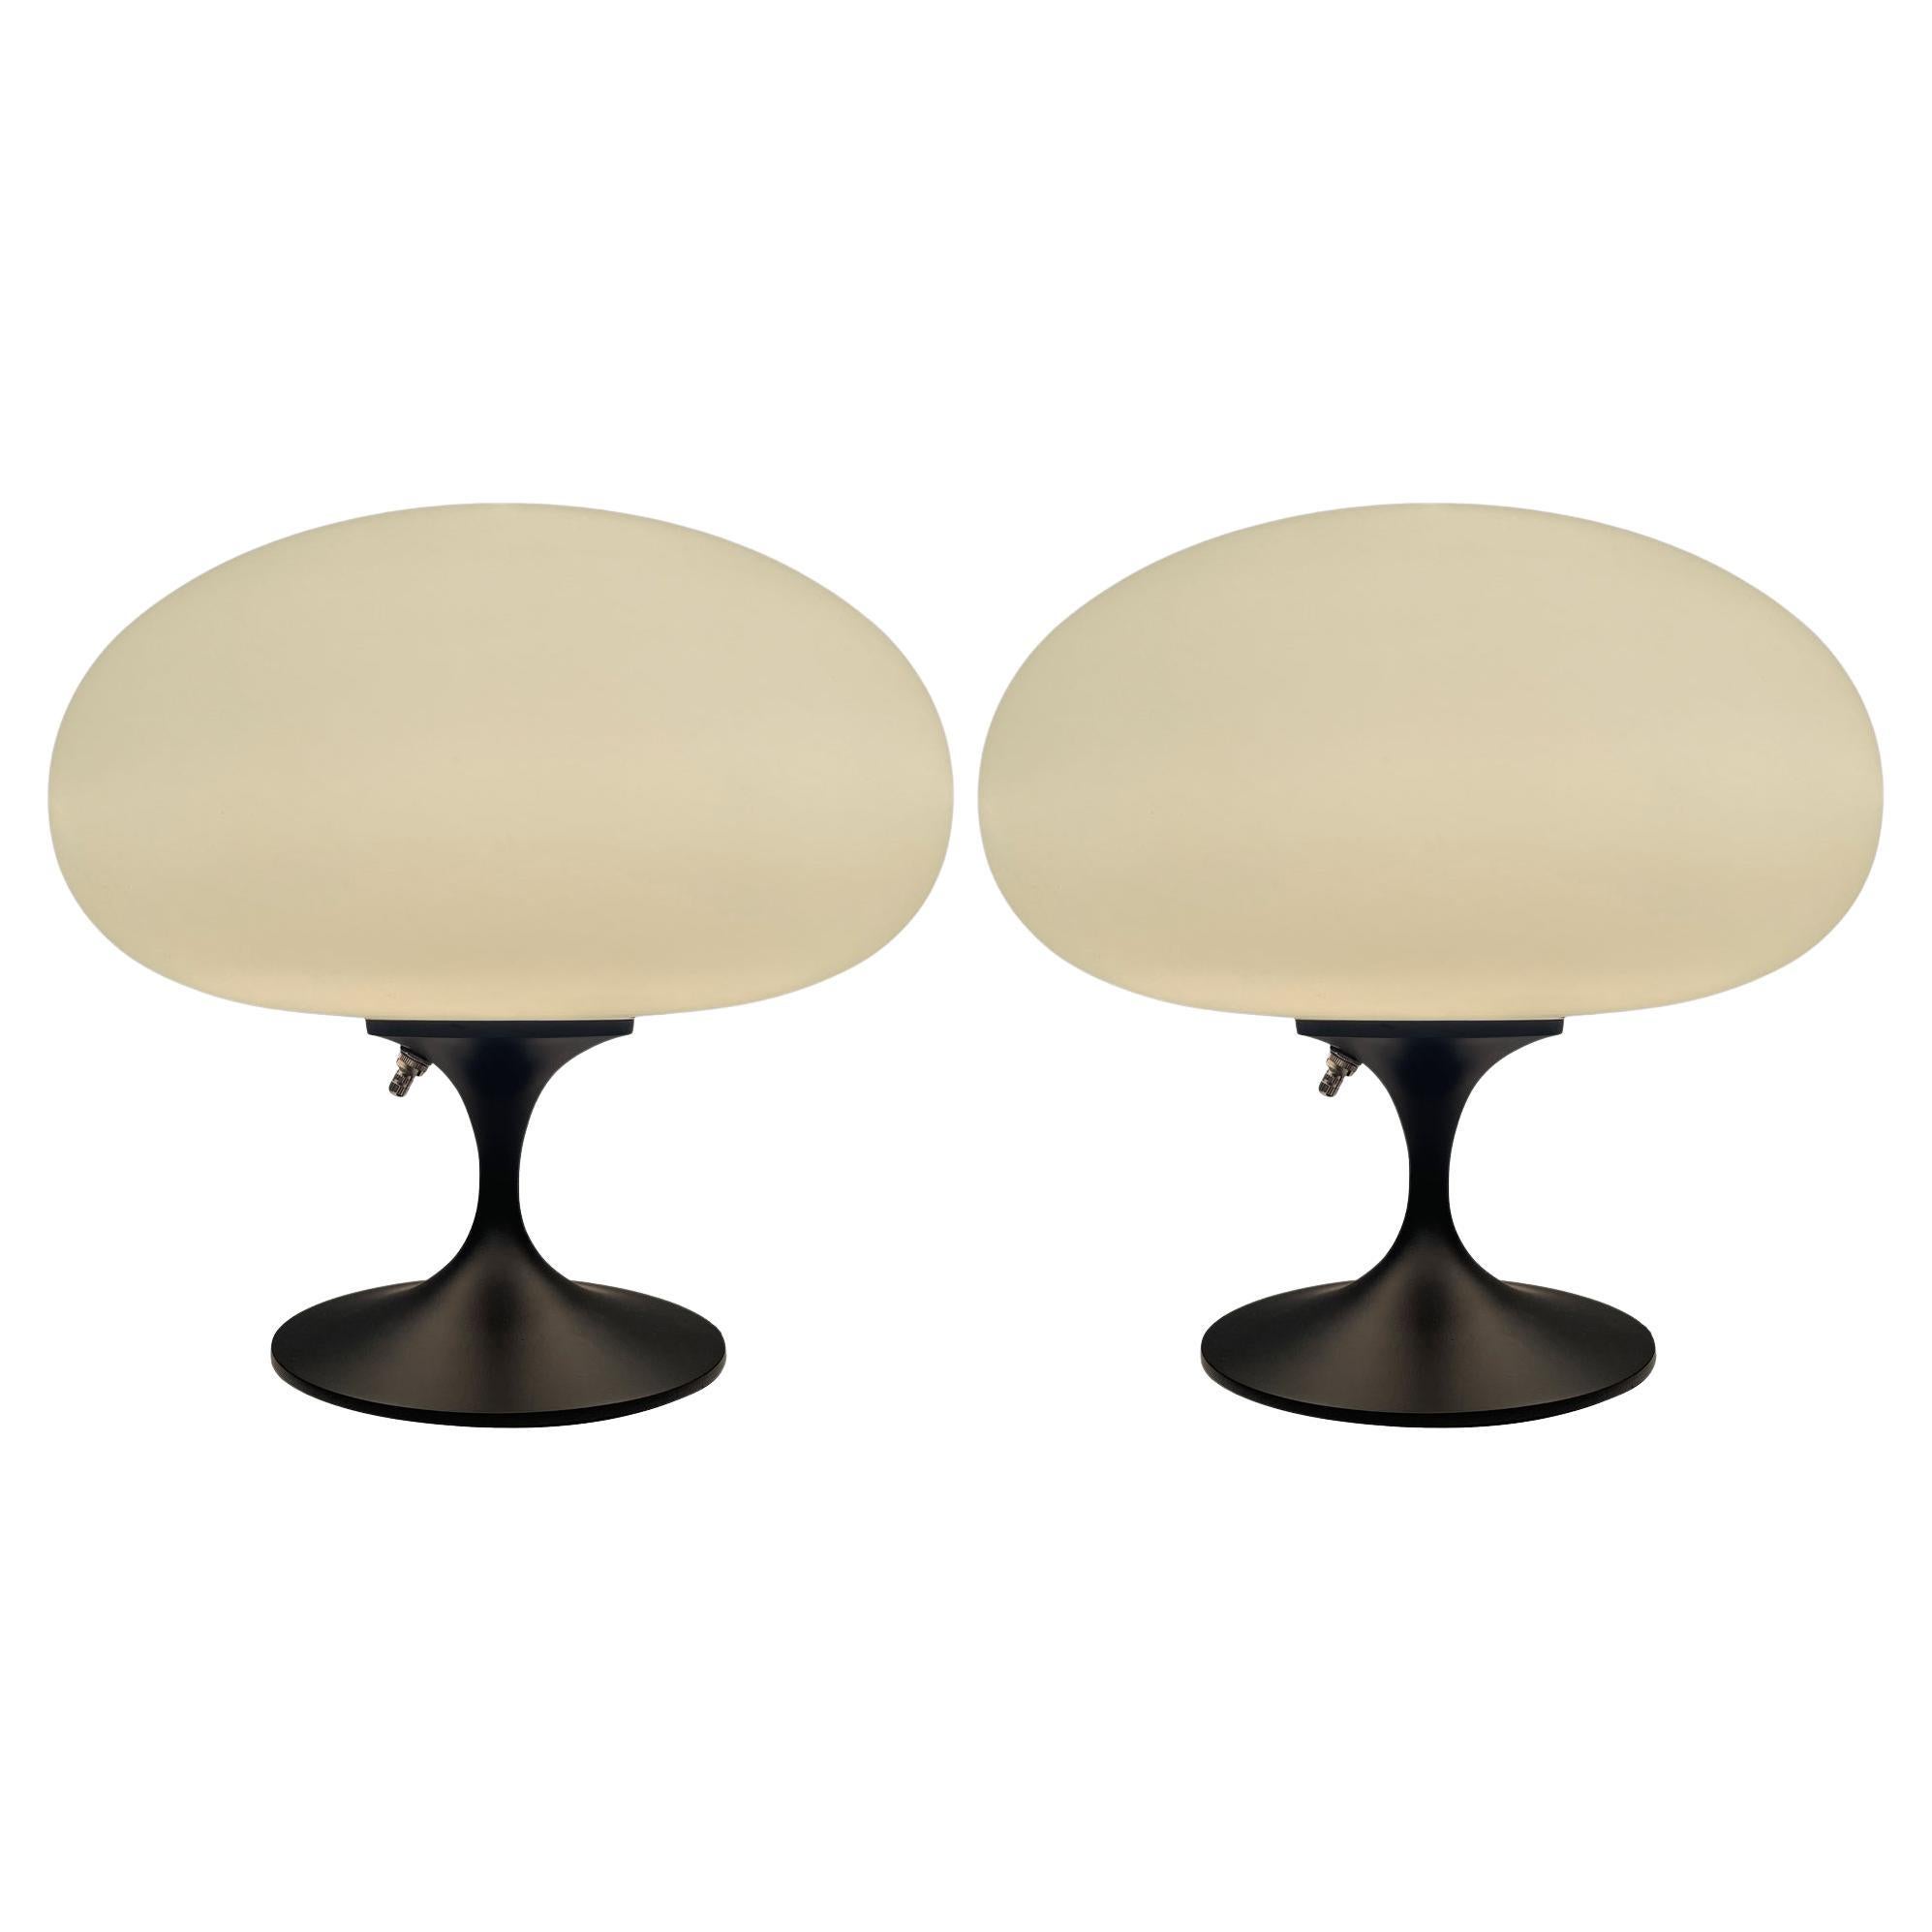 Pair of Mid Century Mushroom Table Lamps by Design Line in Black & White Glass